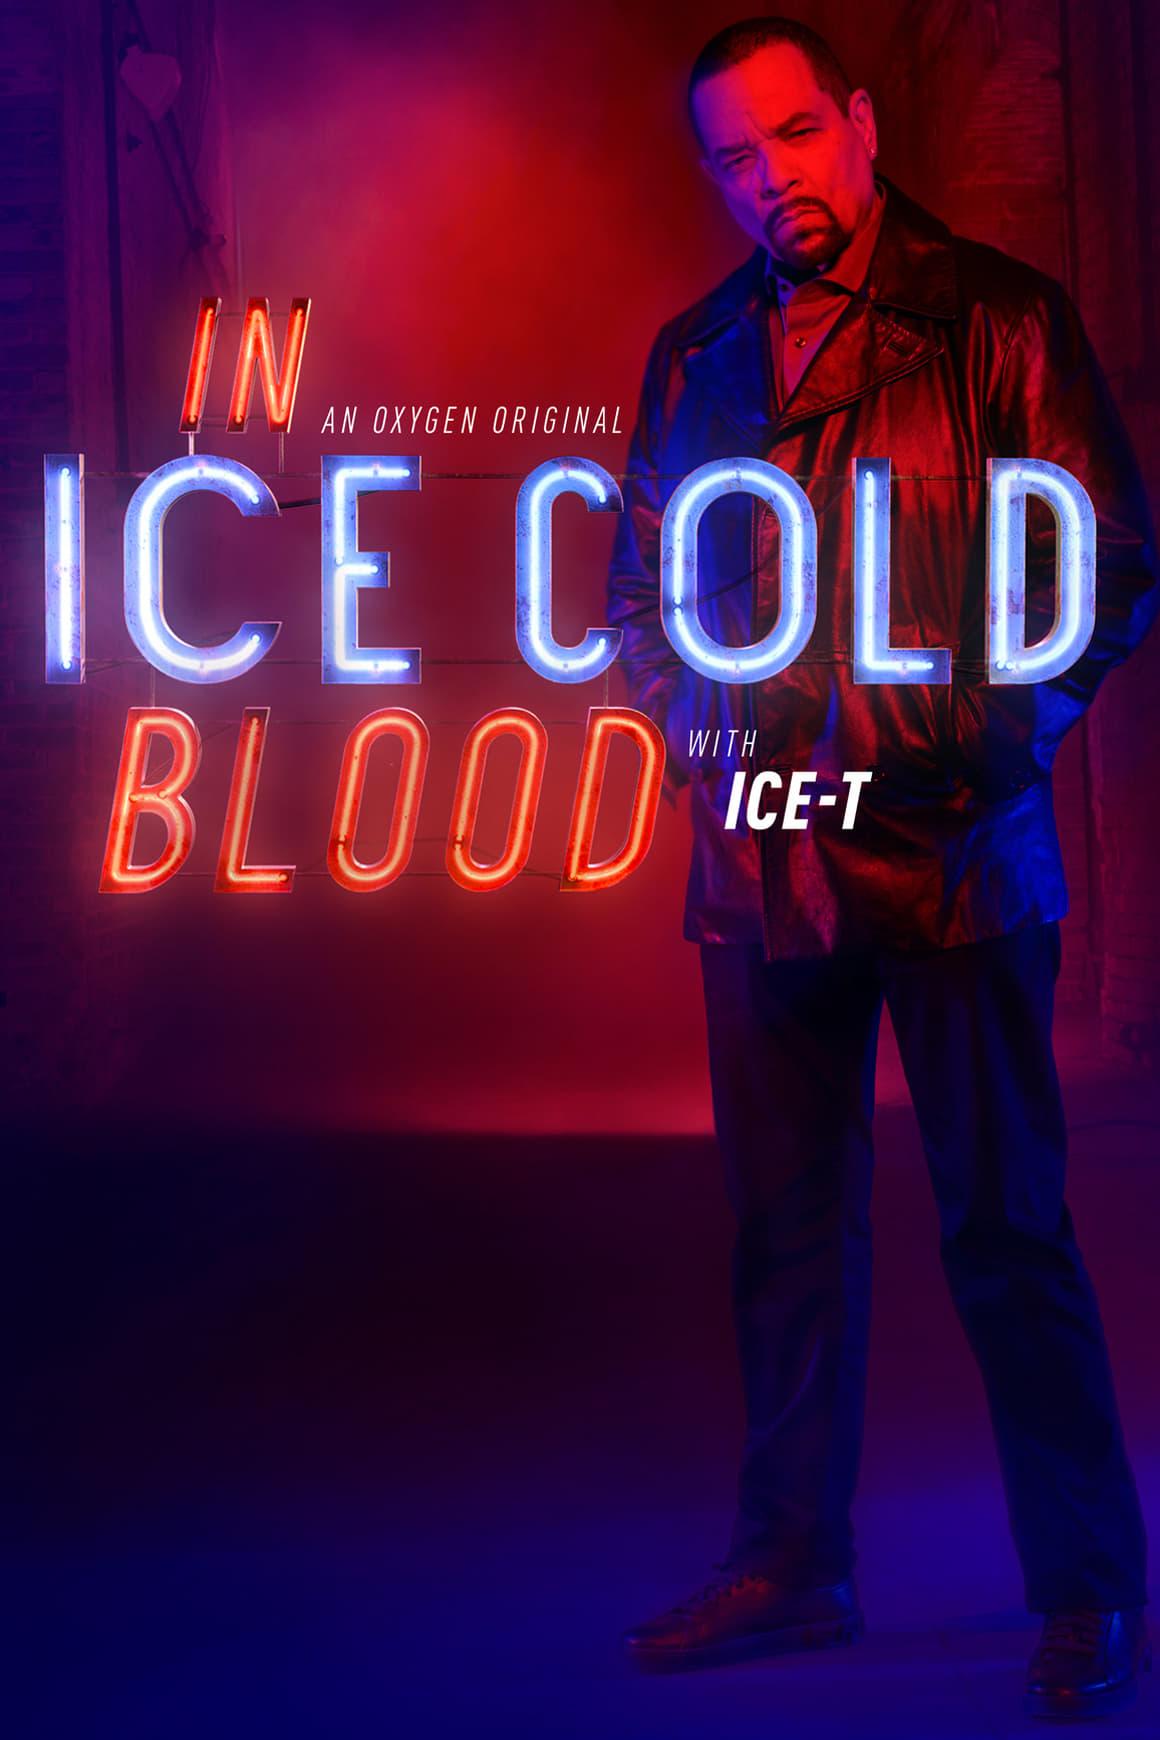 In Ice Cold Blood poster